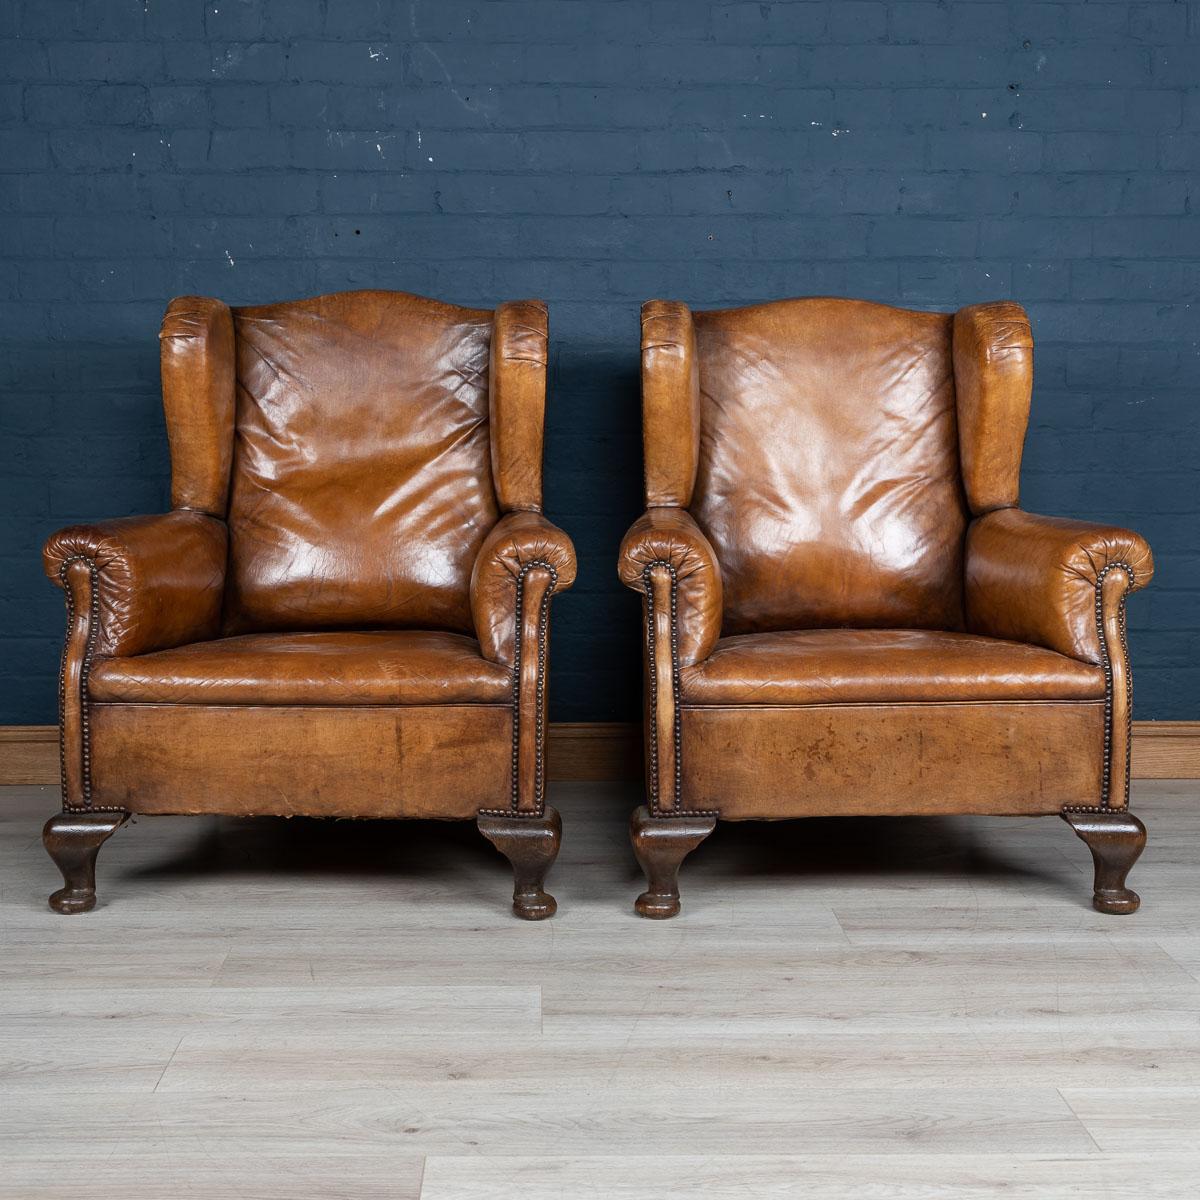 Antique early 20th century wonderful pair of leather wing back armchairs, these chairs were realised by the finest Dutch craftsmen, the solid wood frame upholstered in superb quality leather which over the years have only gained in class and style.